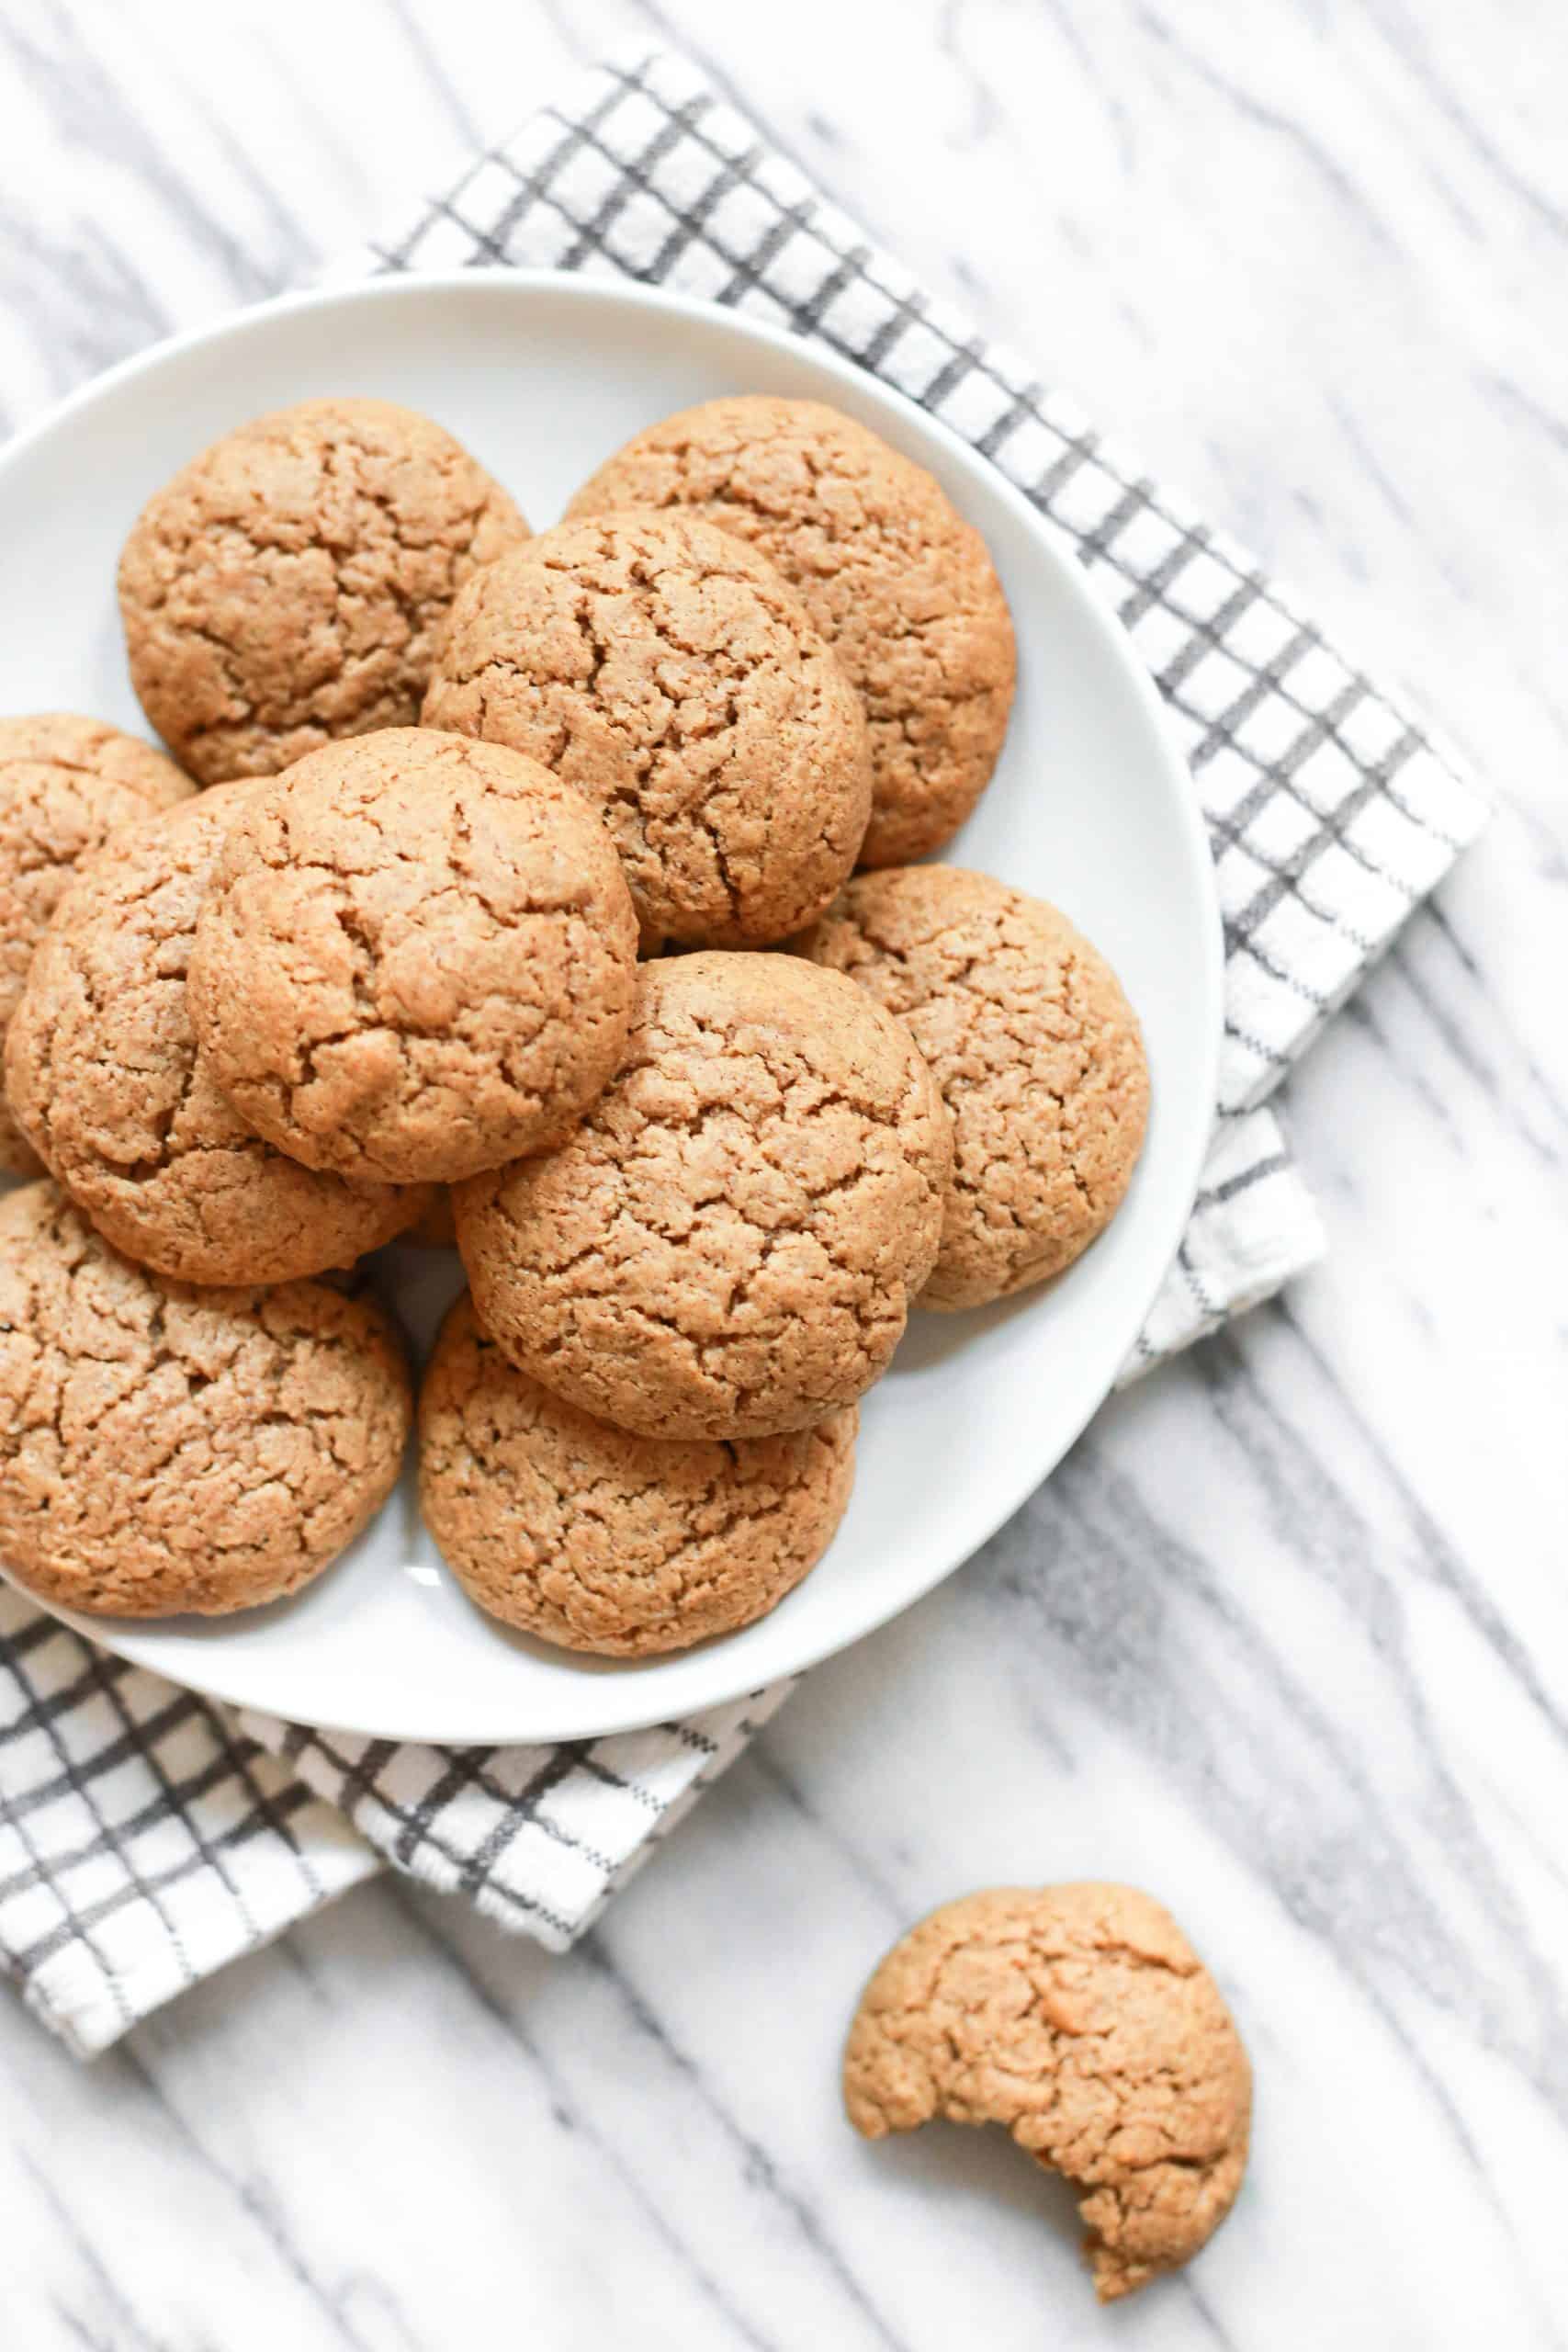 Almond butter cookies on a plate.